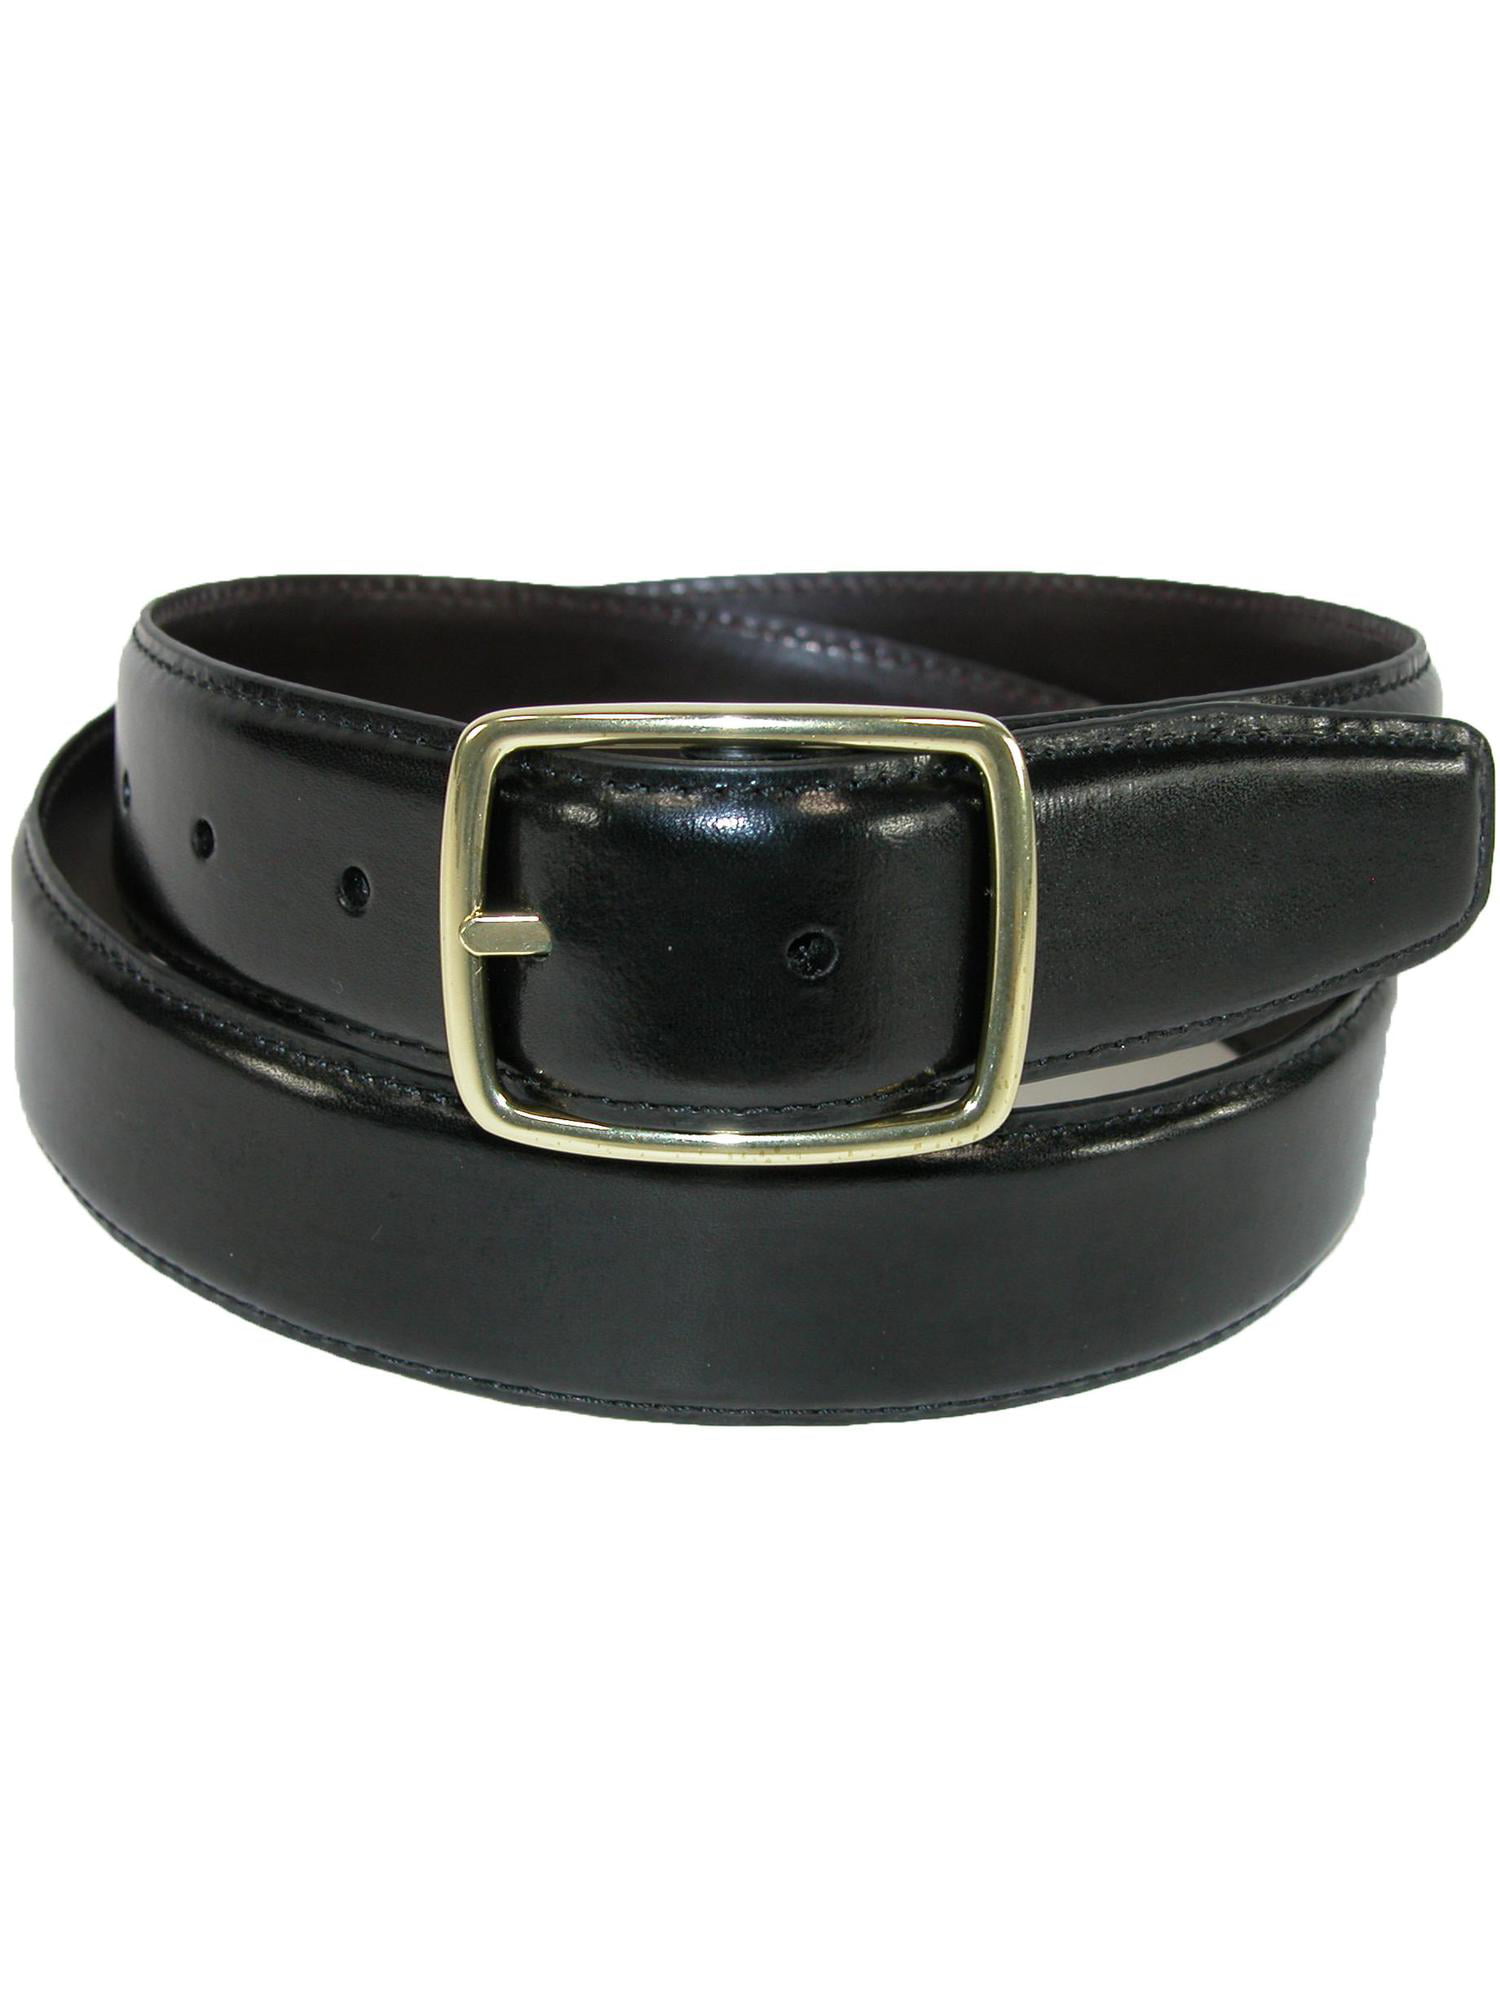 #8212-1.25" WIDE BLACK LEATHER DRESS BELT FOR MEN SIZES TO FIT MOST & ON SALE 